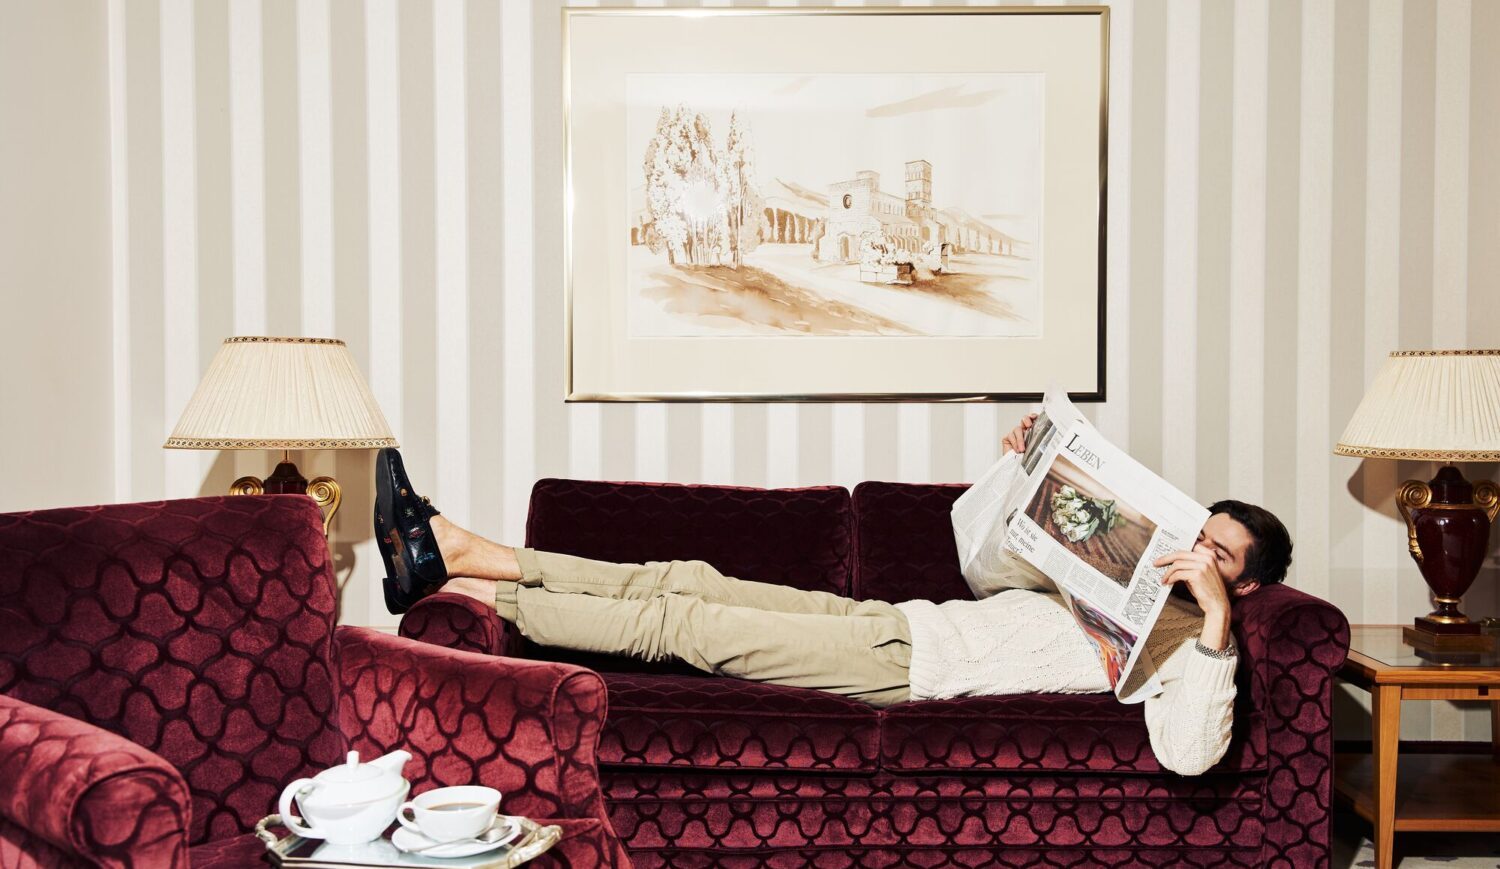 The suites offer plenty of space to relax, for example with a newspaper © Travelcharme - Arne Nagel